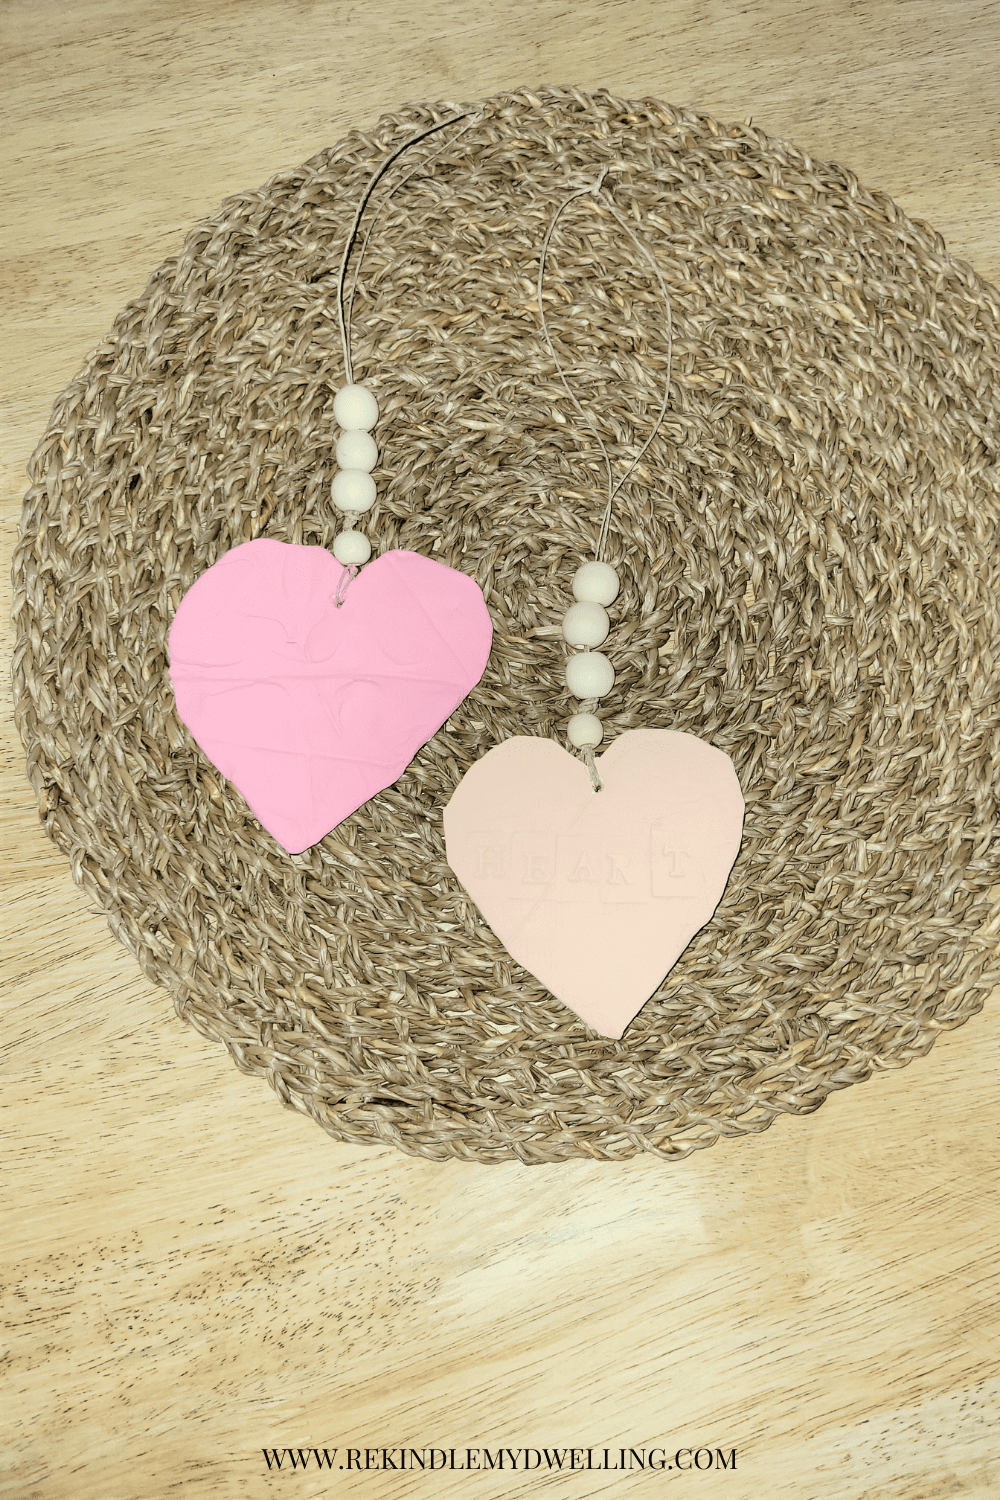 Heart ornaments with wood beads laying on a place mat.